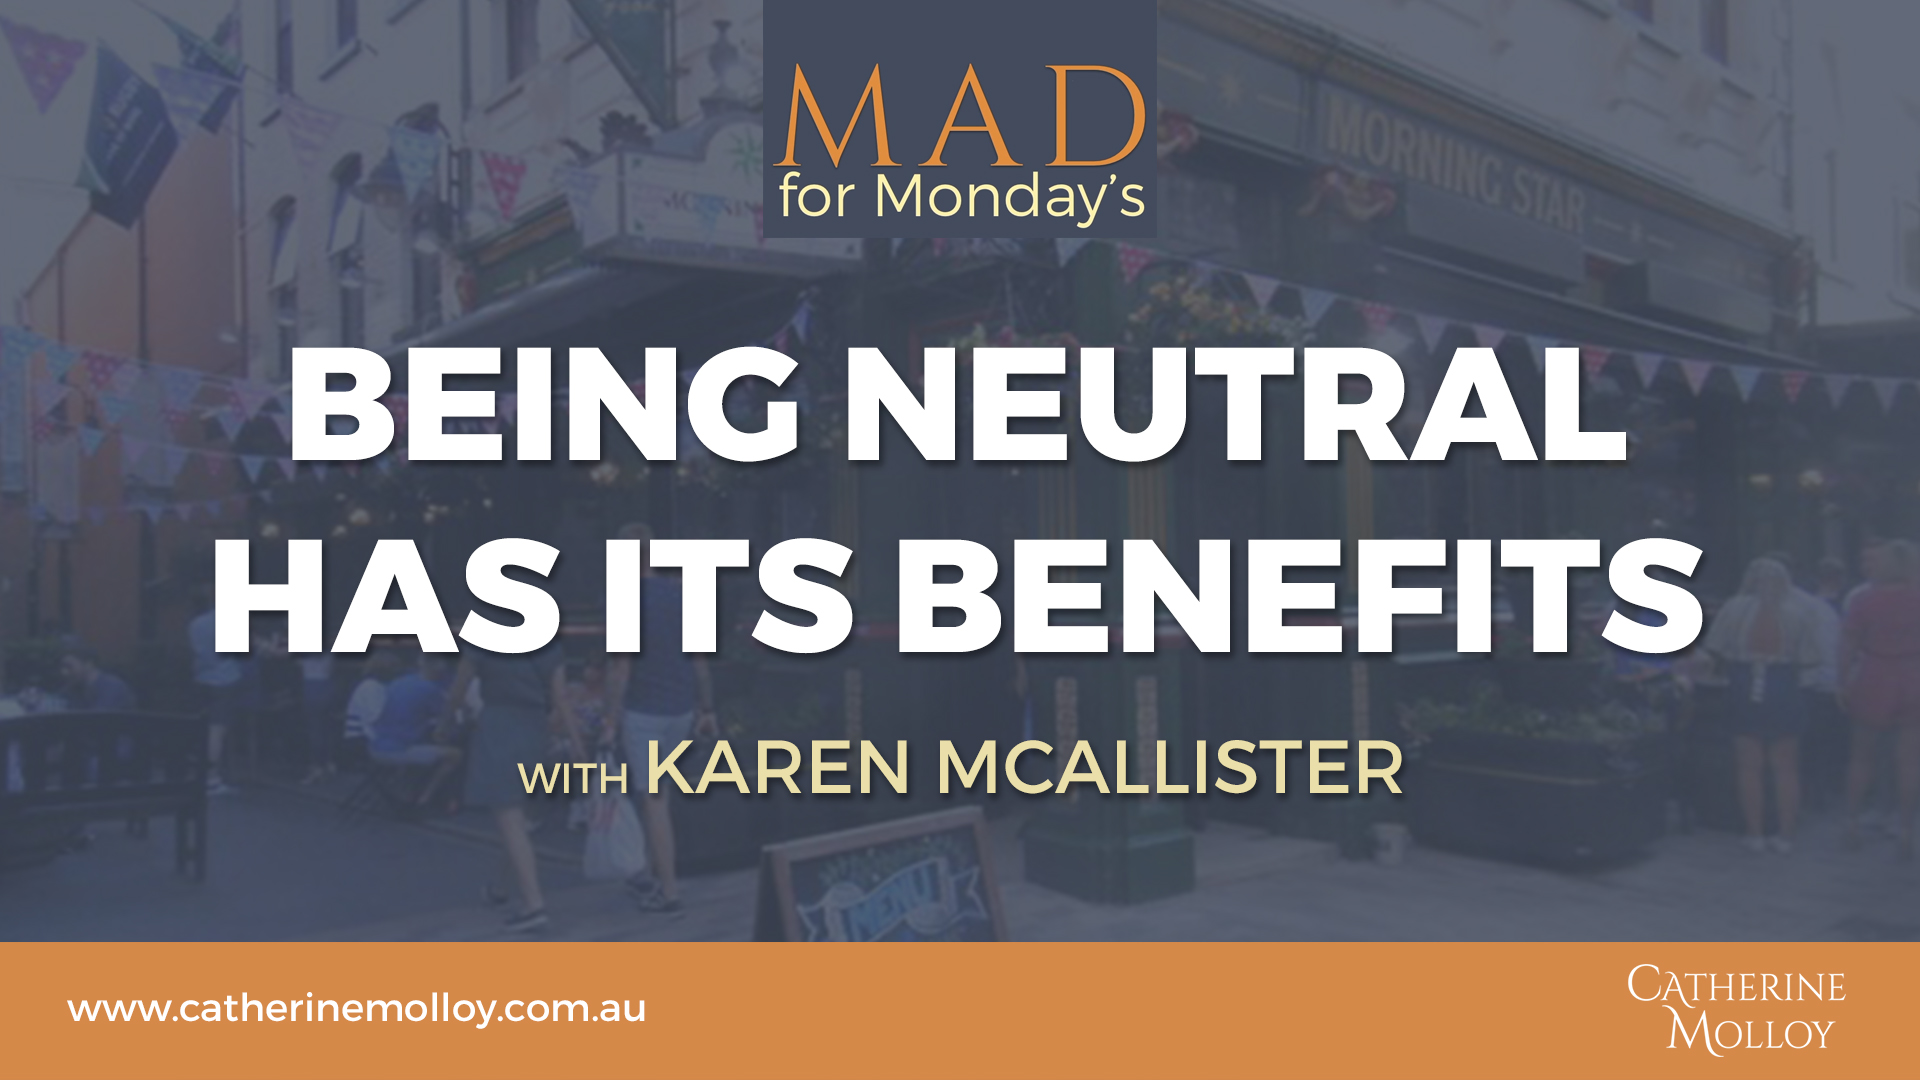 MAD for Monday’s – Being Neutral has its Benefits